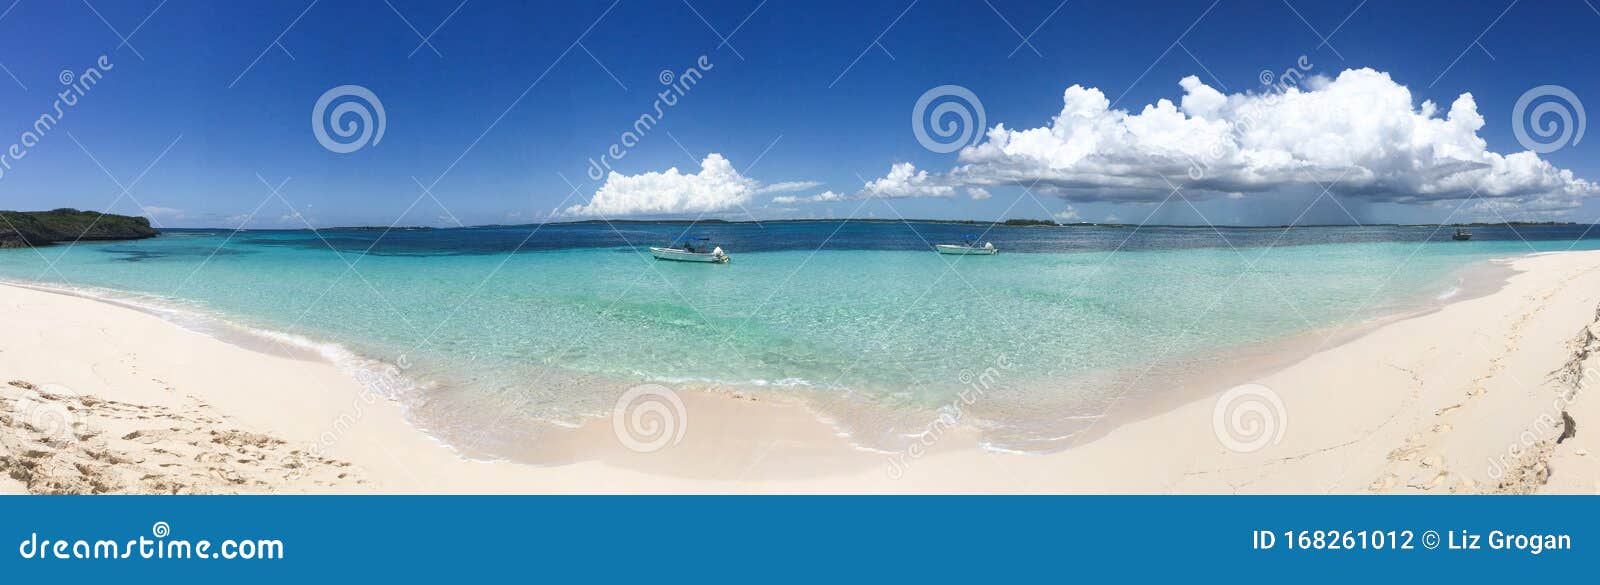 panorama of two boats anchored to turquoise waters off a white sand beach under a blue sky in abaco, bahamas